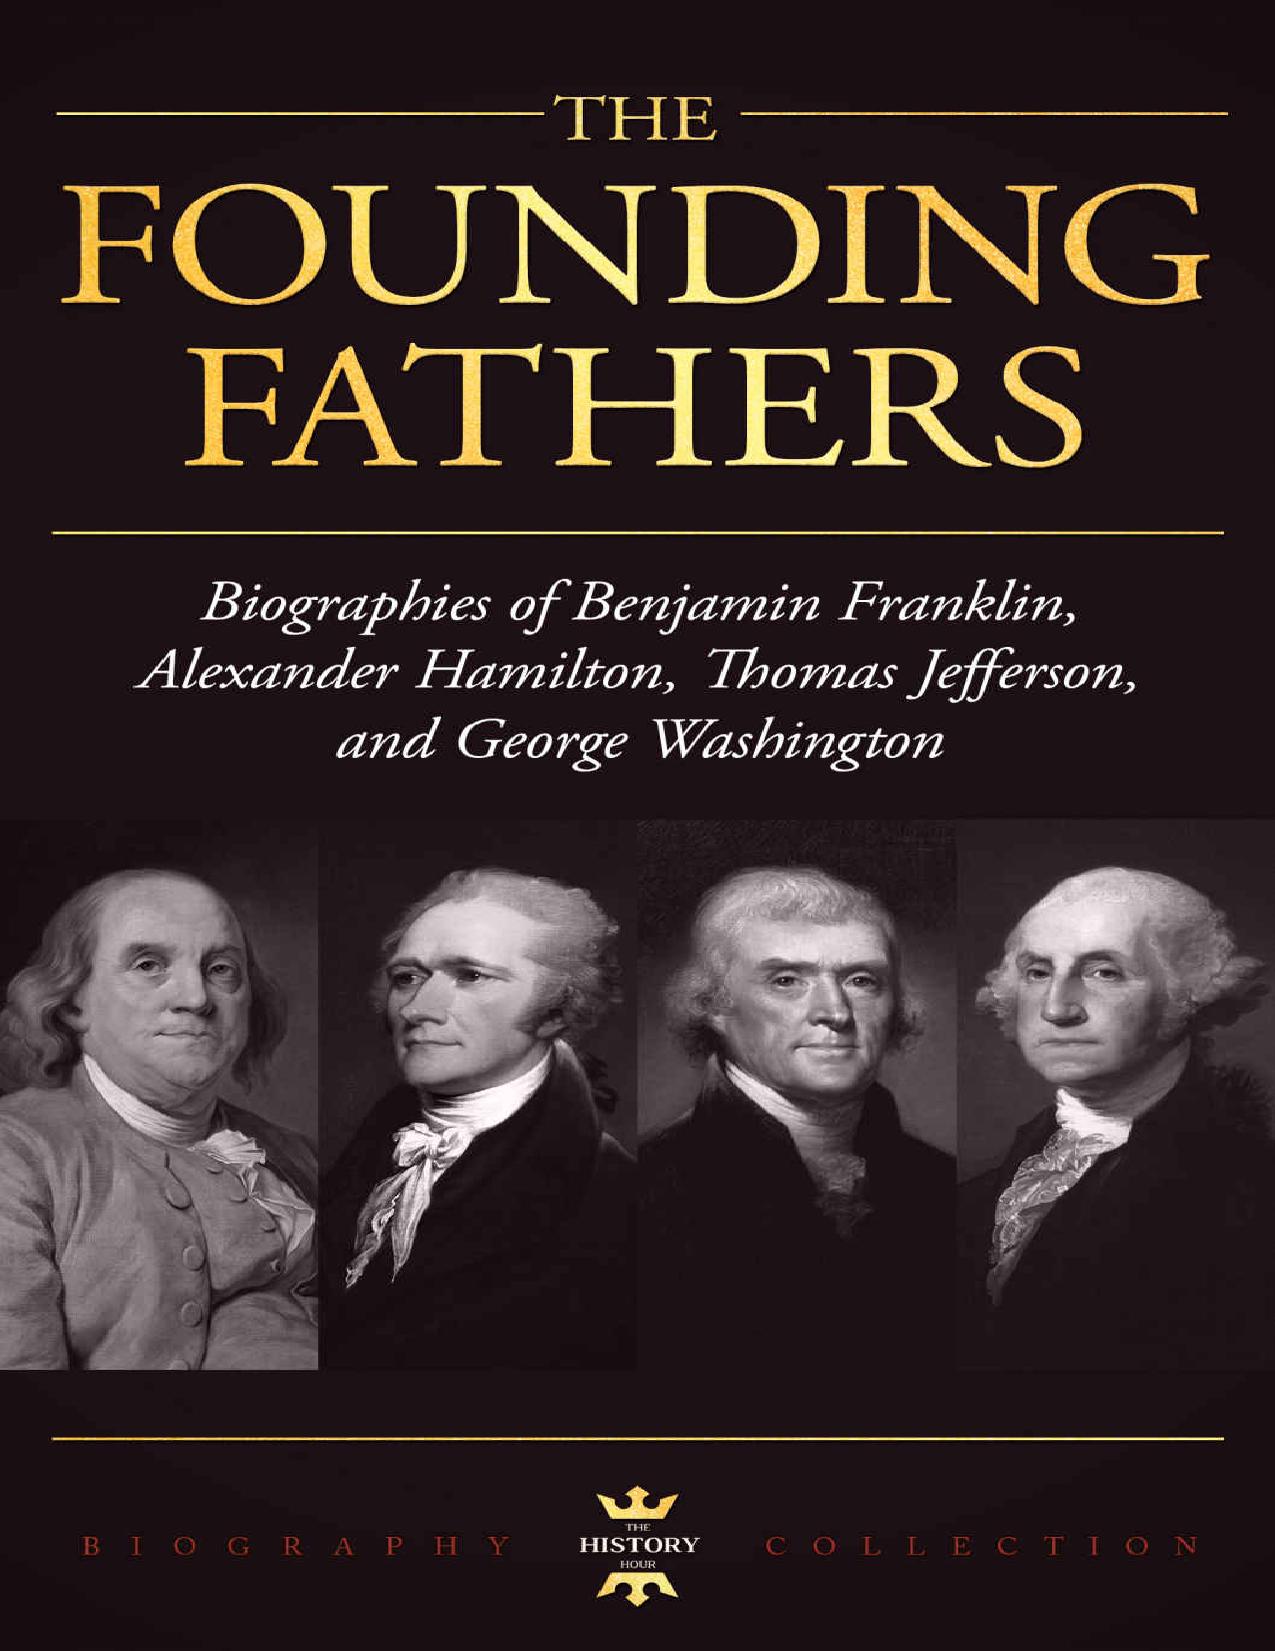 GEORGE WASHINGTON, ALEXANDER HAMILTON, THOMAS JEFFERSON, AND BENJAMIN FRANKLIN: The Founding Fathers. The Biography Collection